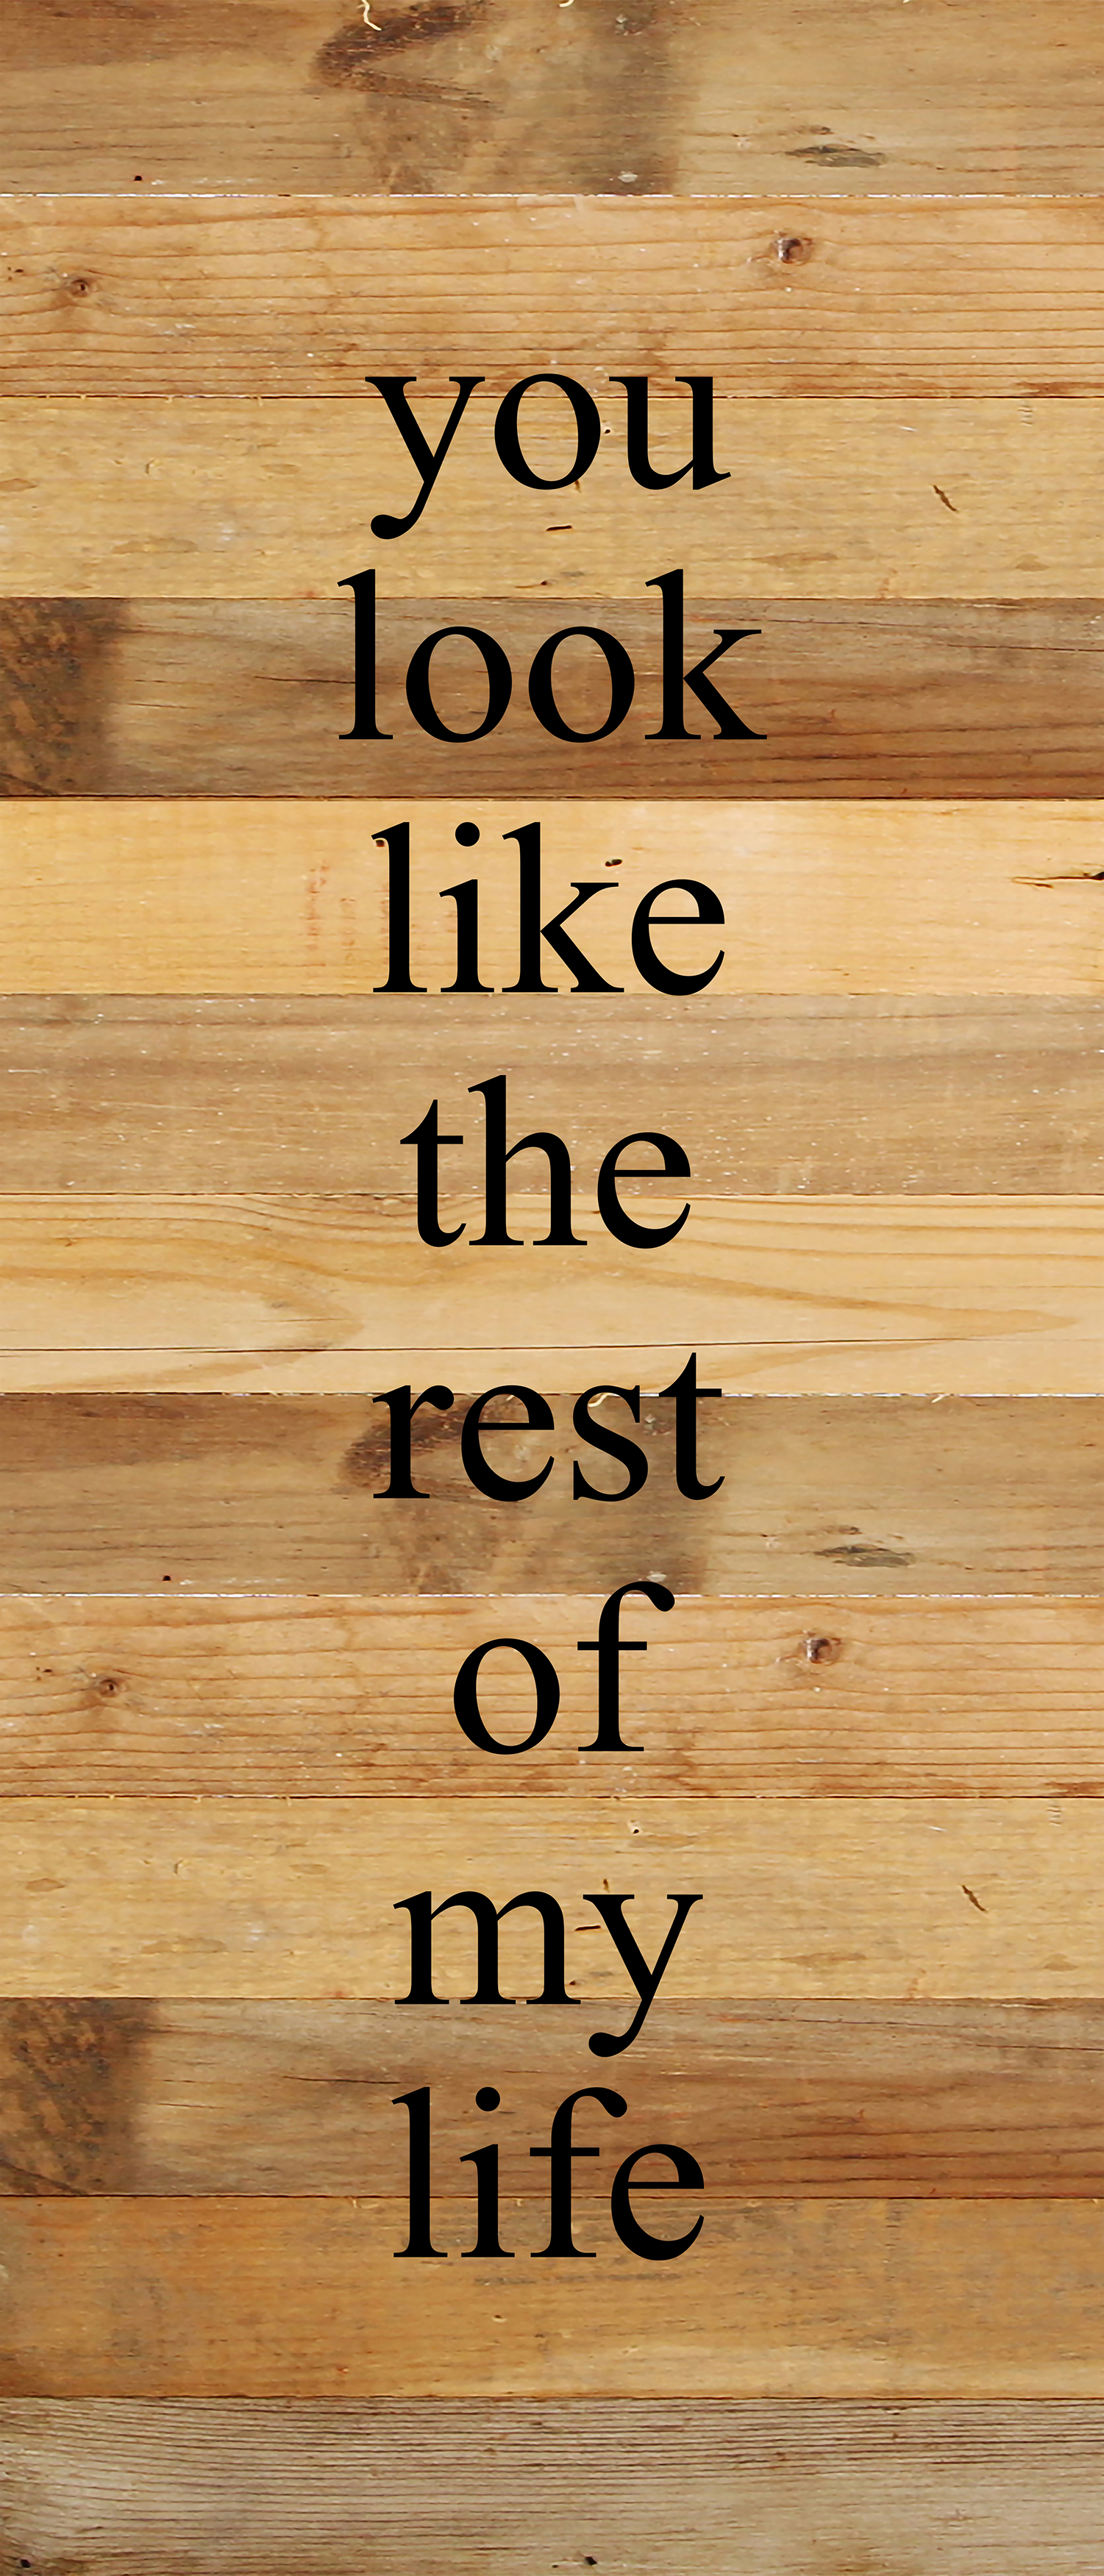 You look like the rest of my life. / 6"x14" Reclaimed Wood Sign